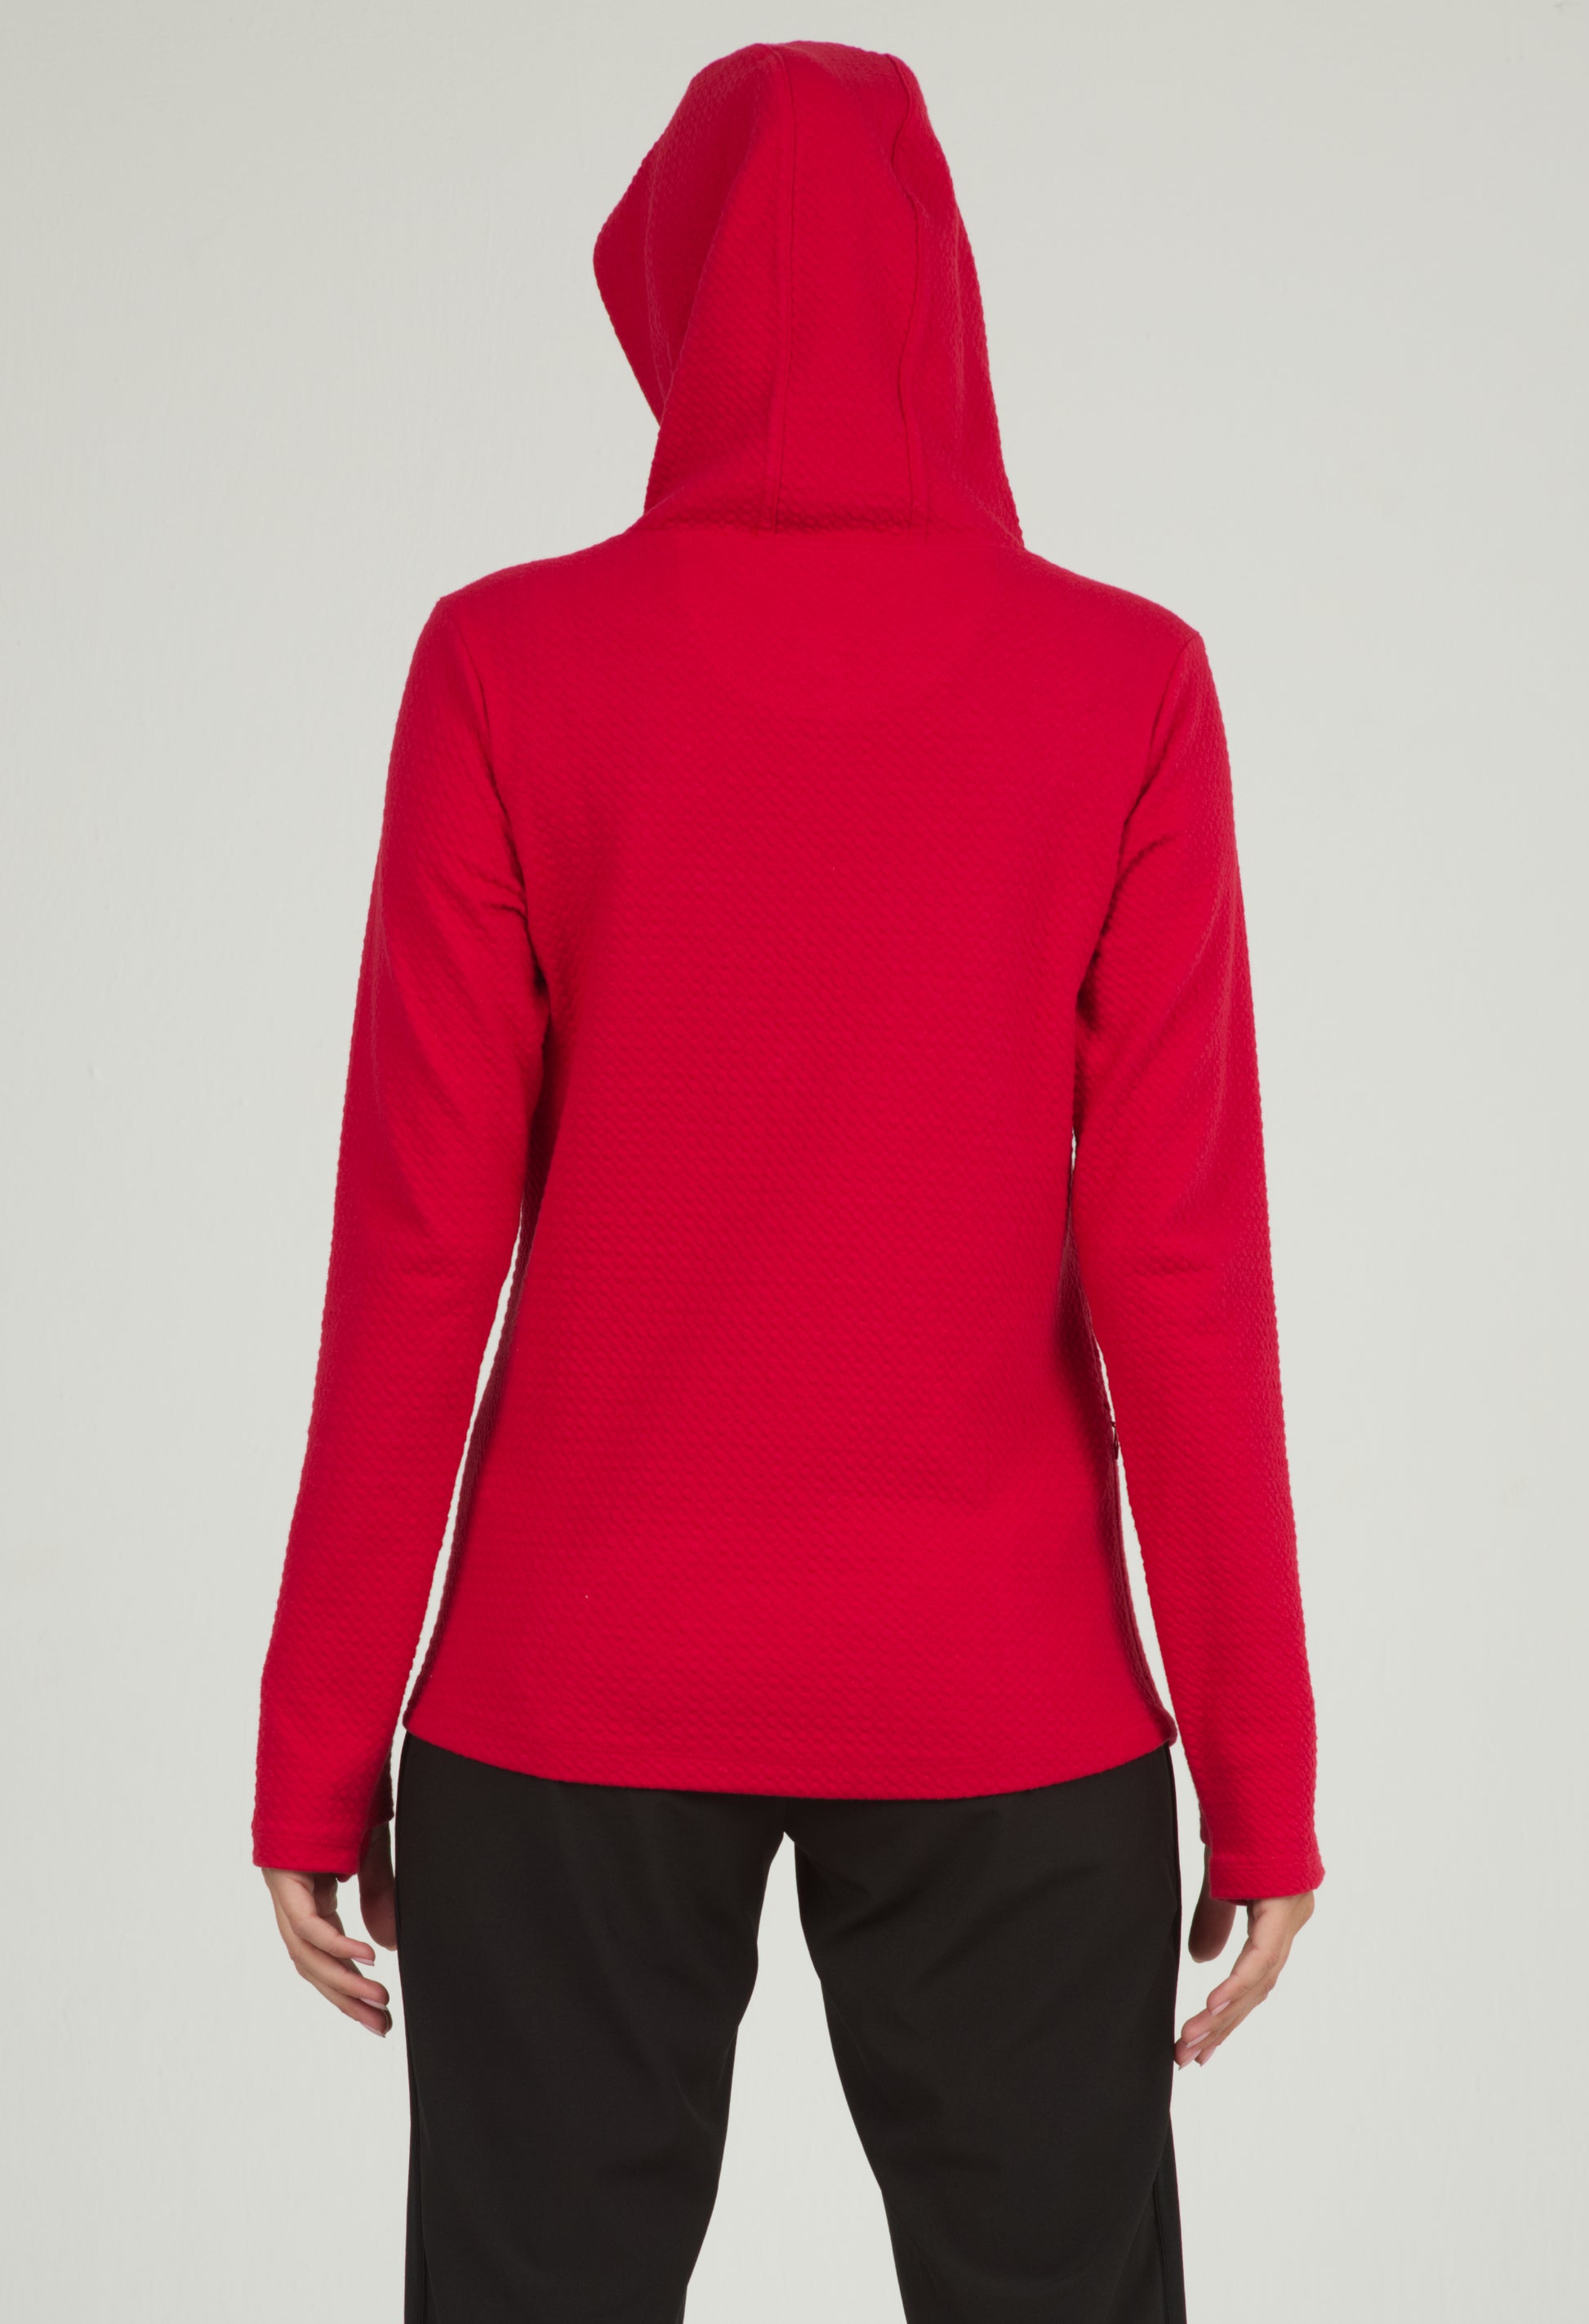 IBKÜL - Solid Popcorn Stitch Hoody - 30000 - Color: Red